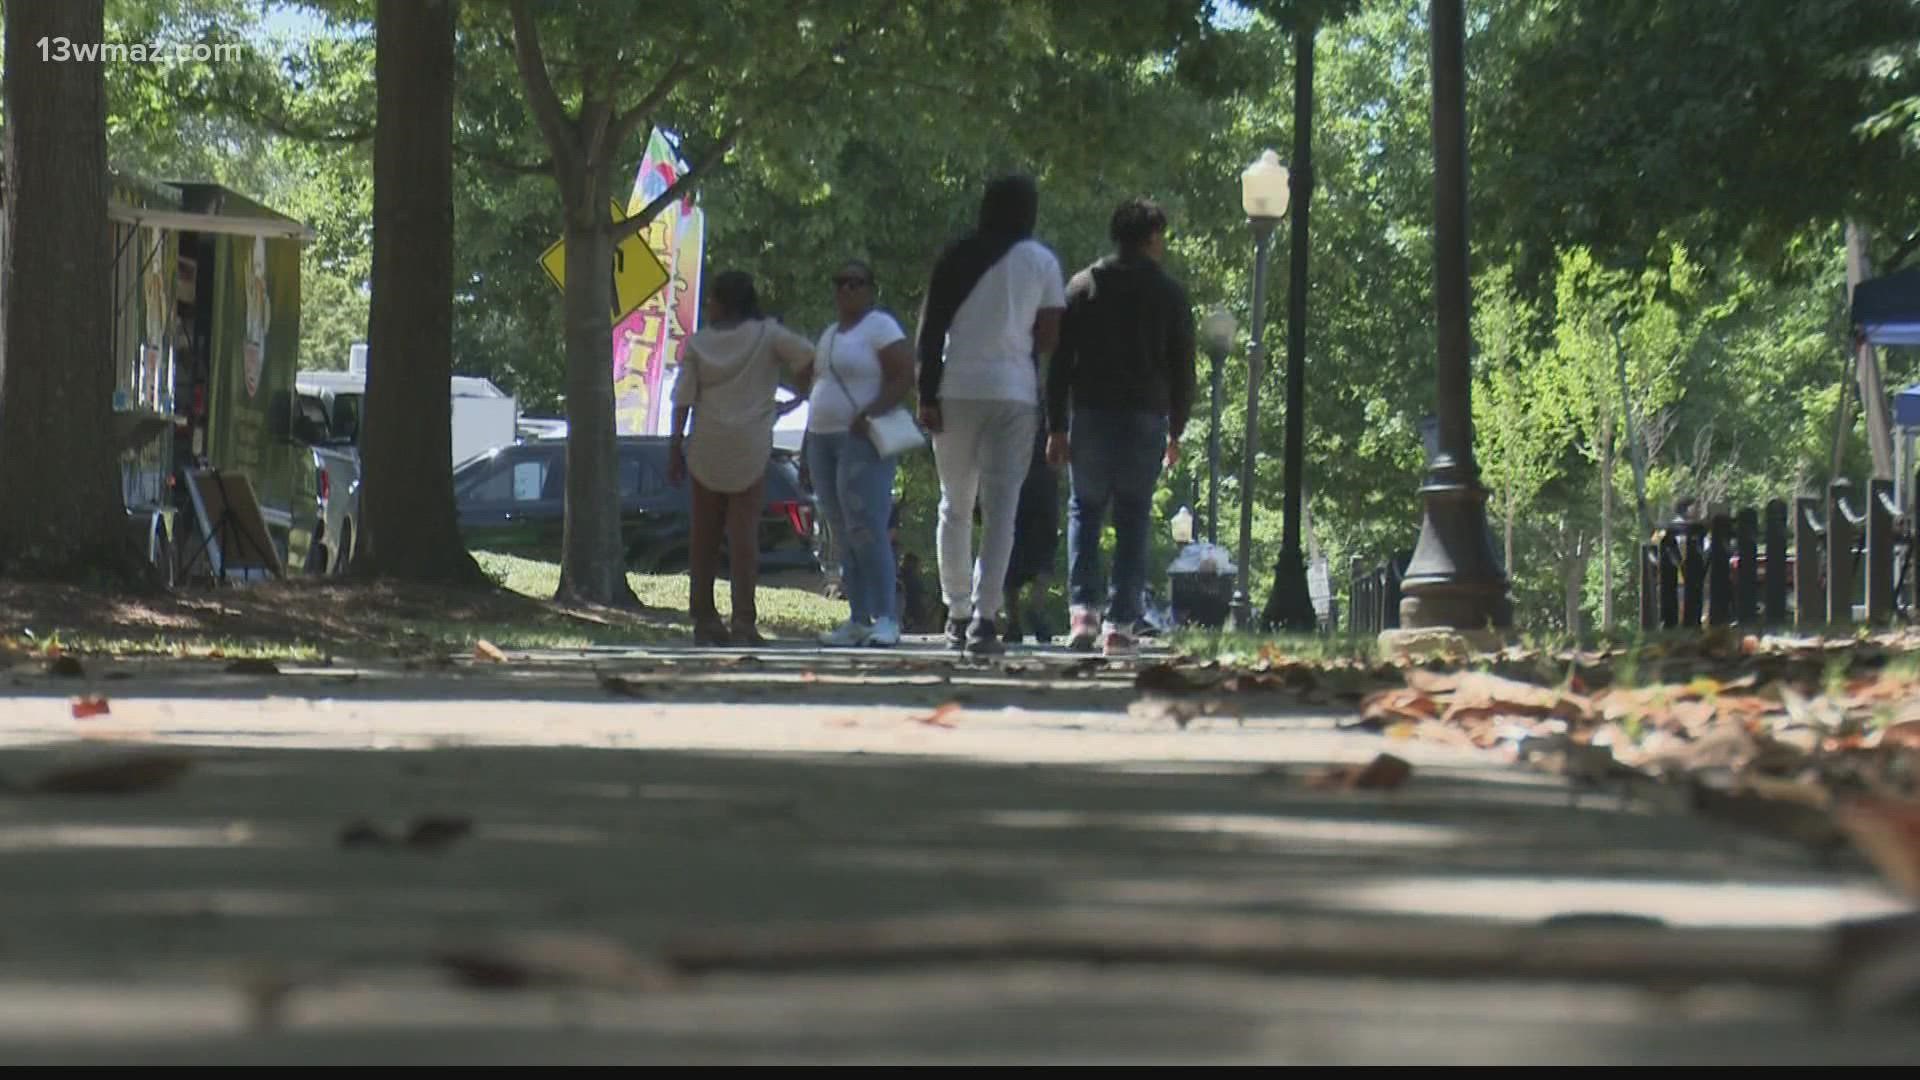 People went out to Tattnall Square Park to enjoy music, vendors and culture.